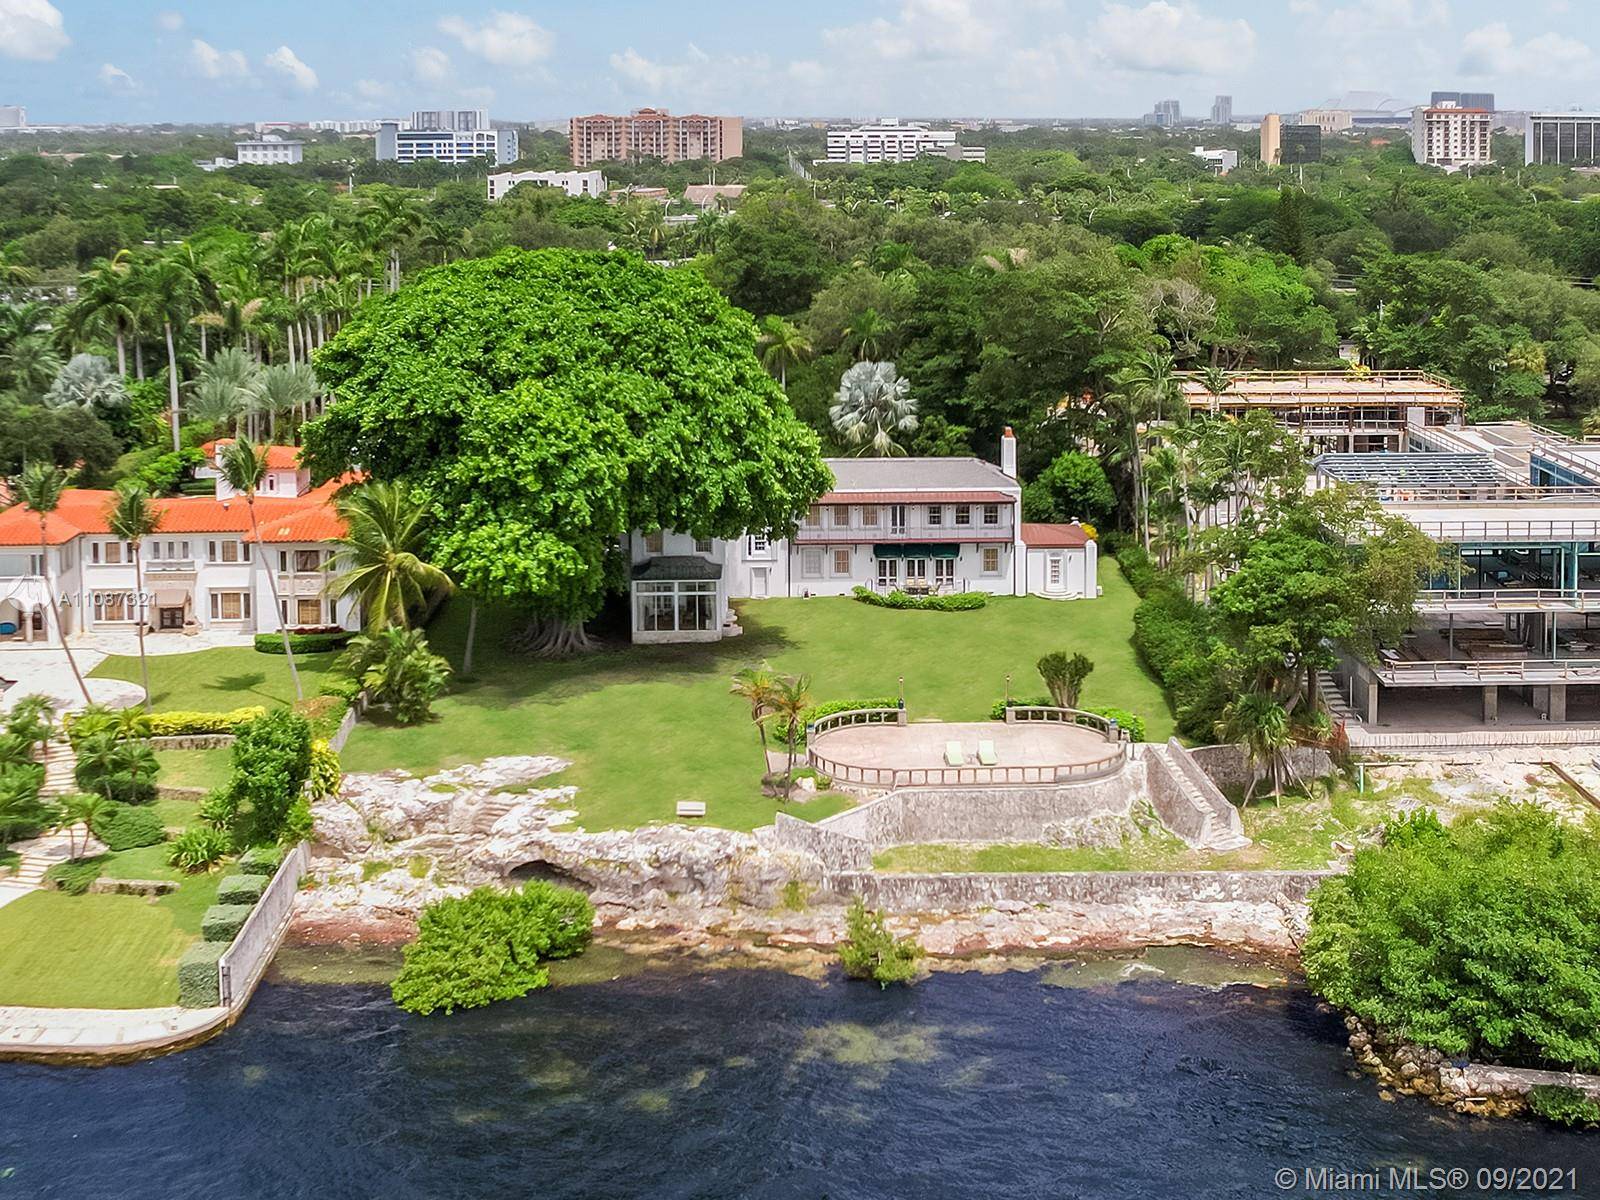 Presenting Fons Praedenum Robber's Spring, an impressive waterfront estate located on Millionaire s Row, offering unparalleled picturesque views of Biscayne Bay and Key Biscayne.